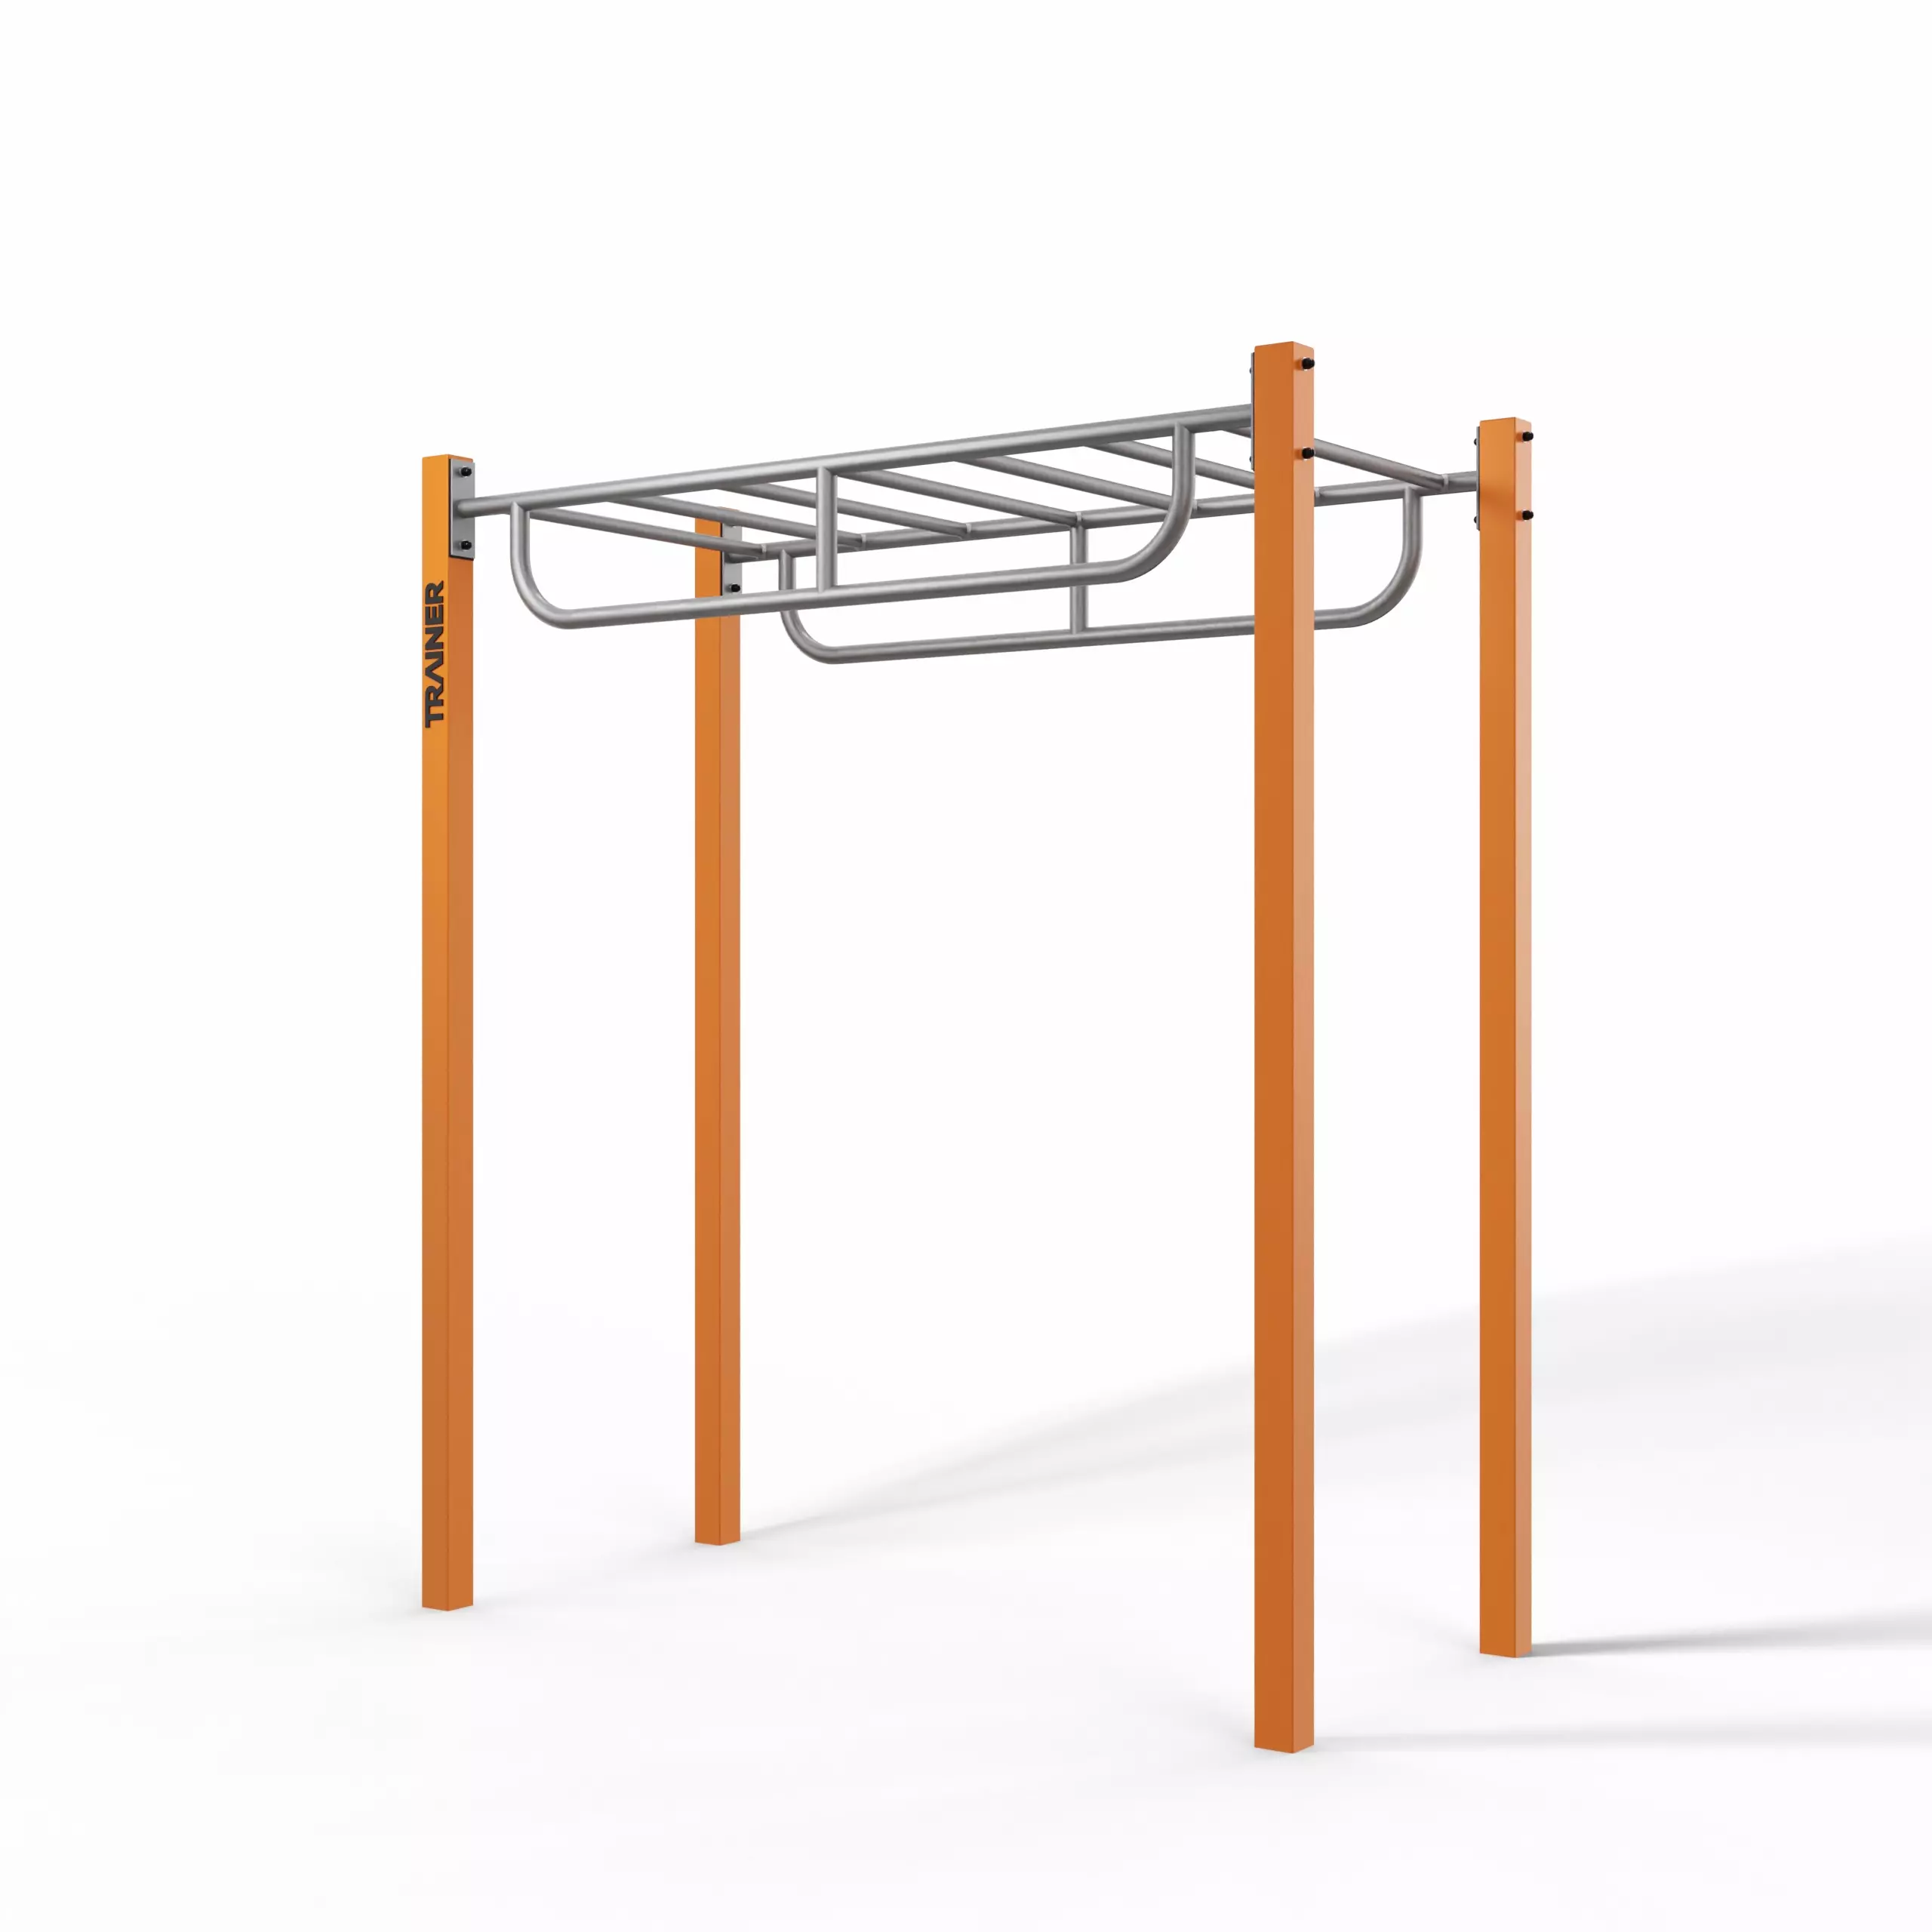 Street Workout Horizontal ladder with handles - Trainer Outdoor Gym